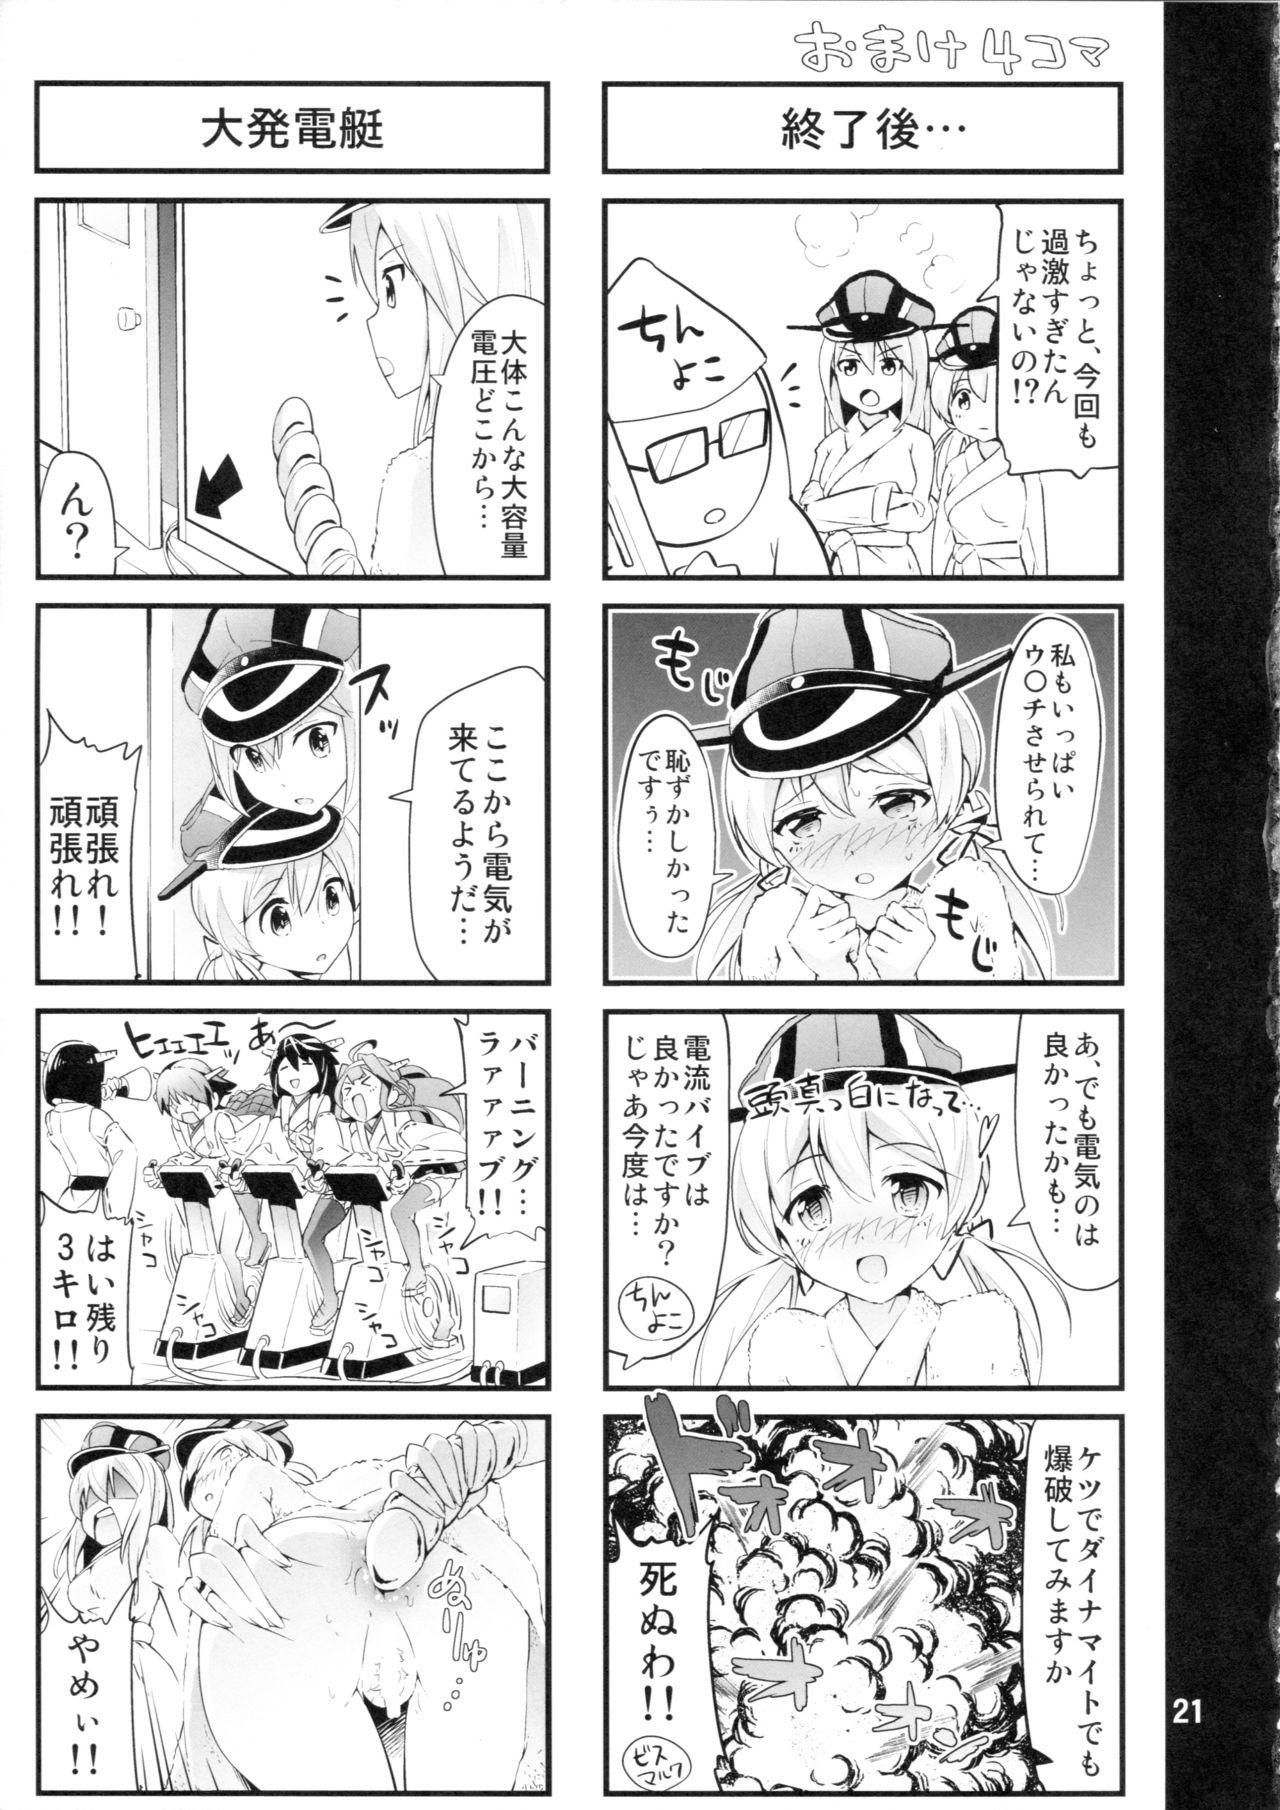 Teenage Sex ICE WORK 4 - Kantai collection Hard Core Sex - Page 20